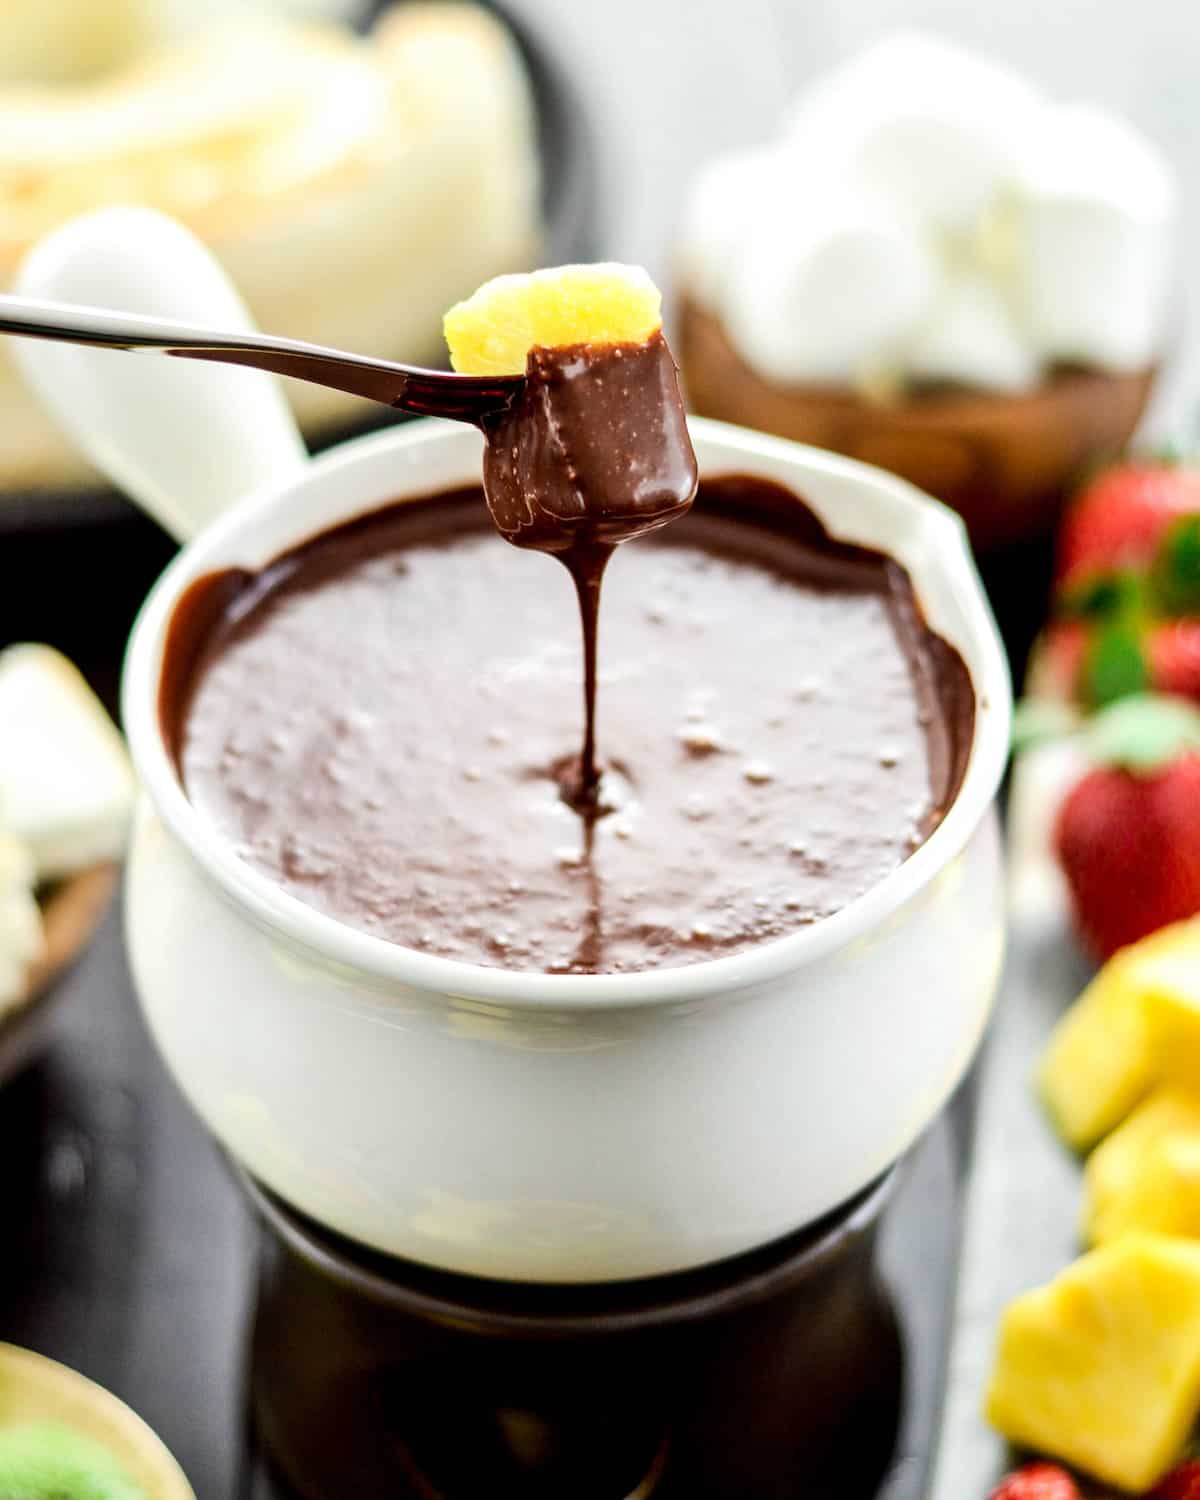 Front view of a piece of pineapple being dipped into a bowl of Vegan Chocolate Fondue